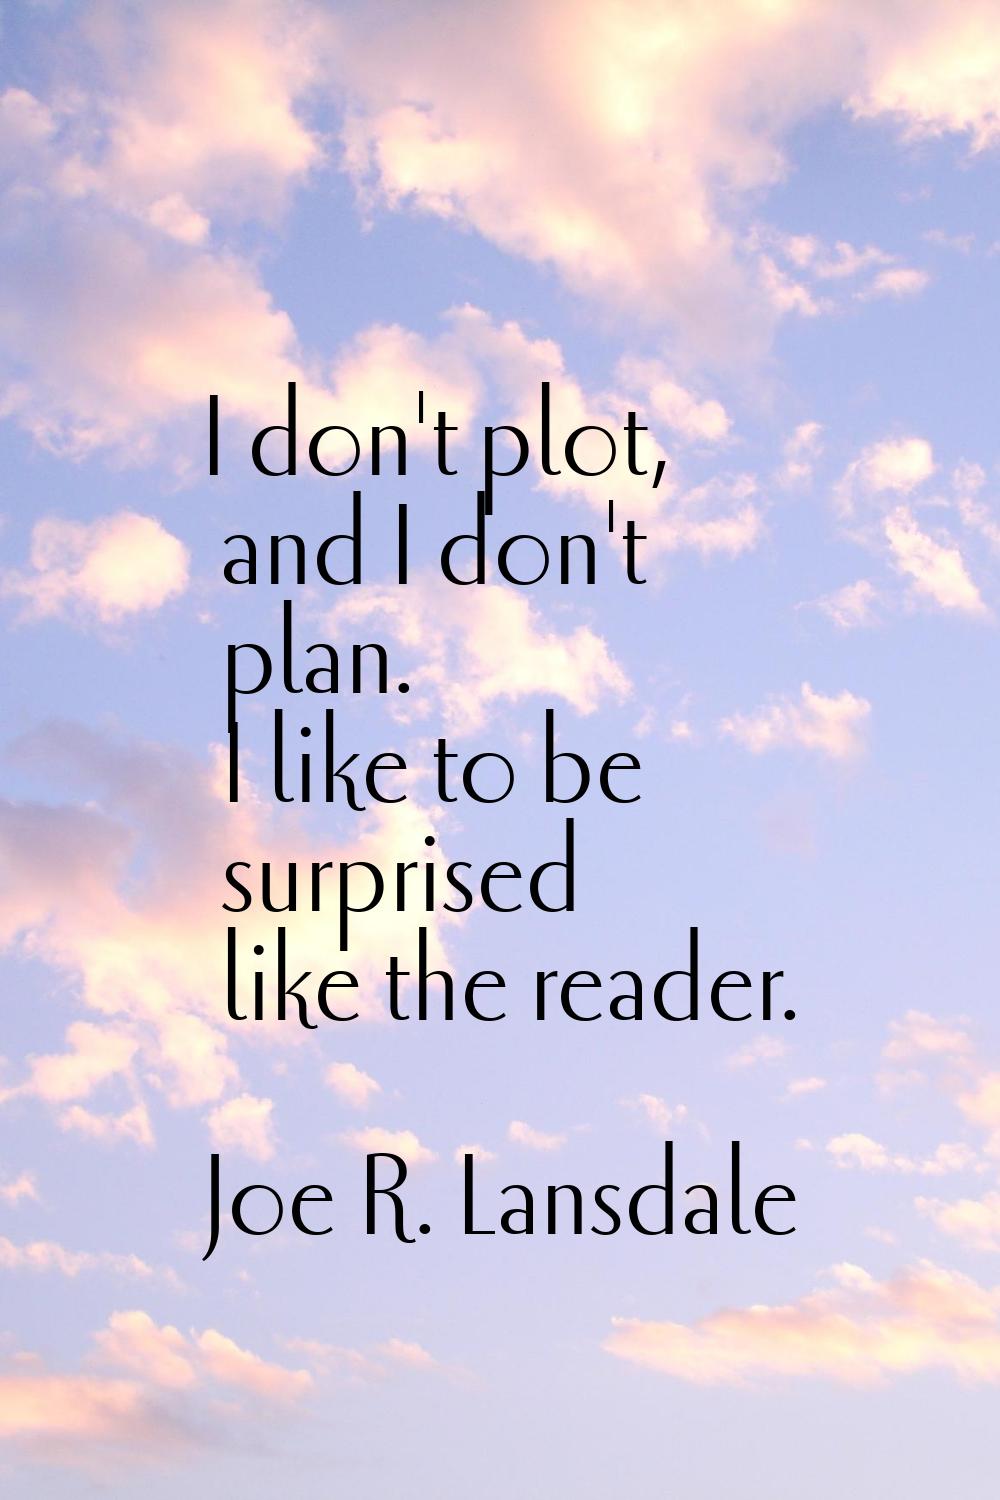 I don't plot, and I don't plan. I like to be surprised like the reader.